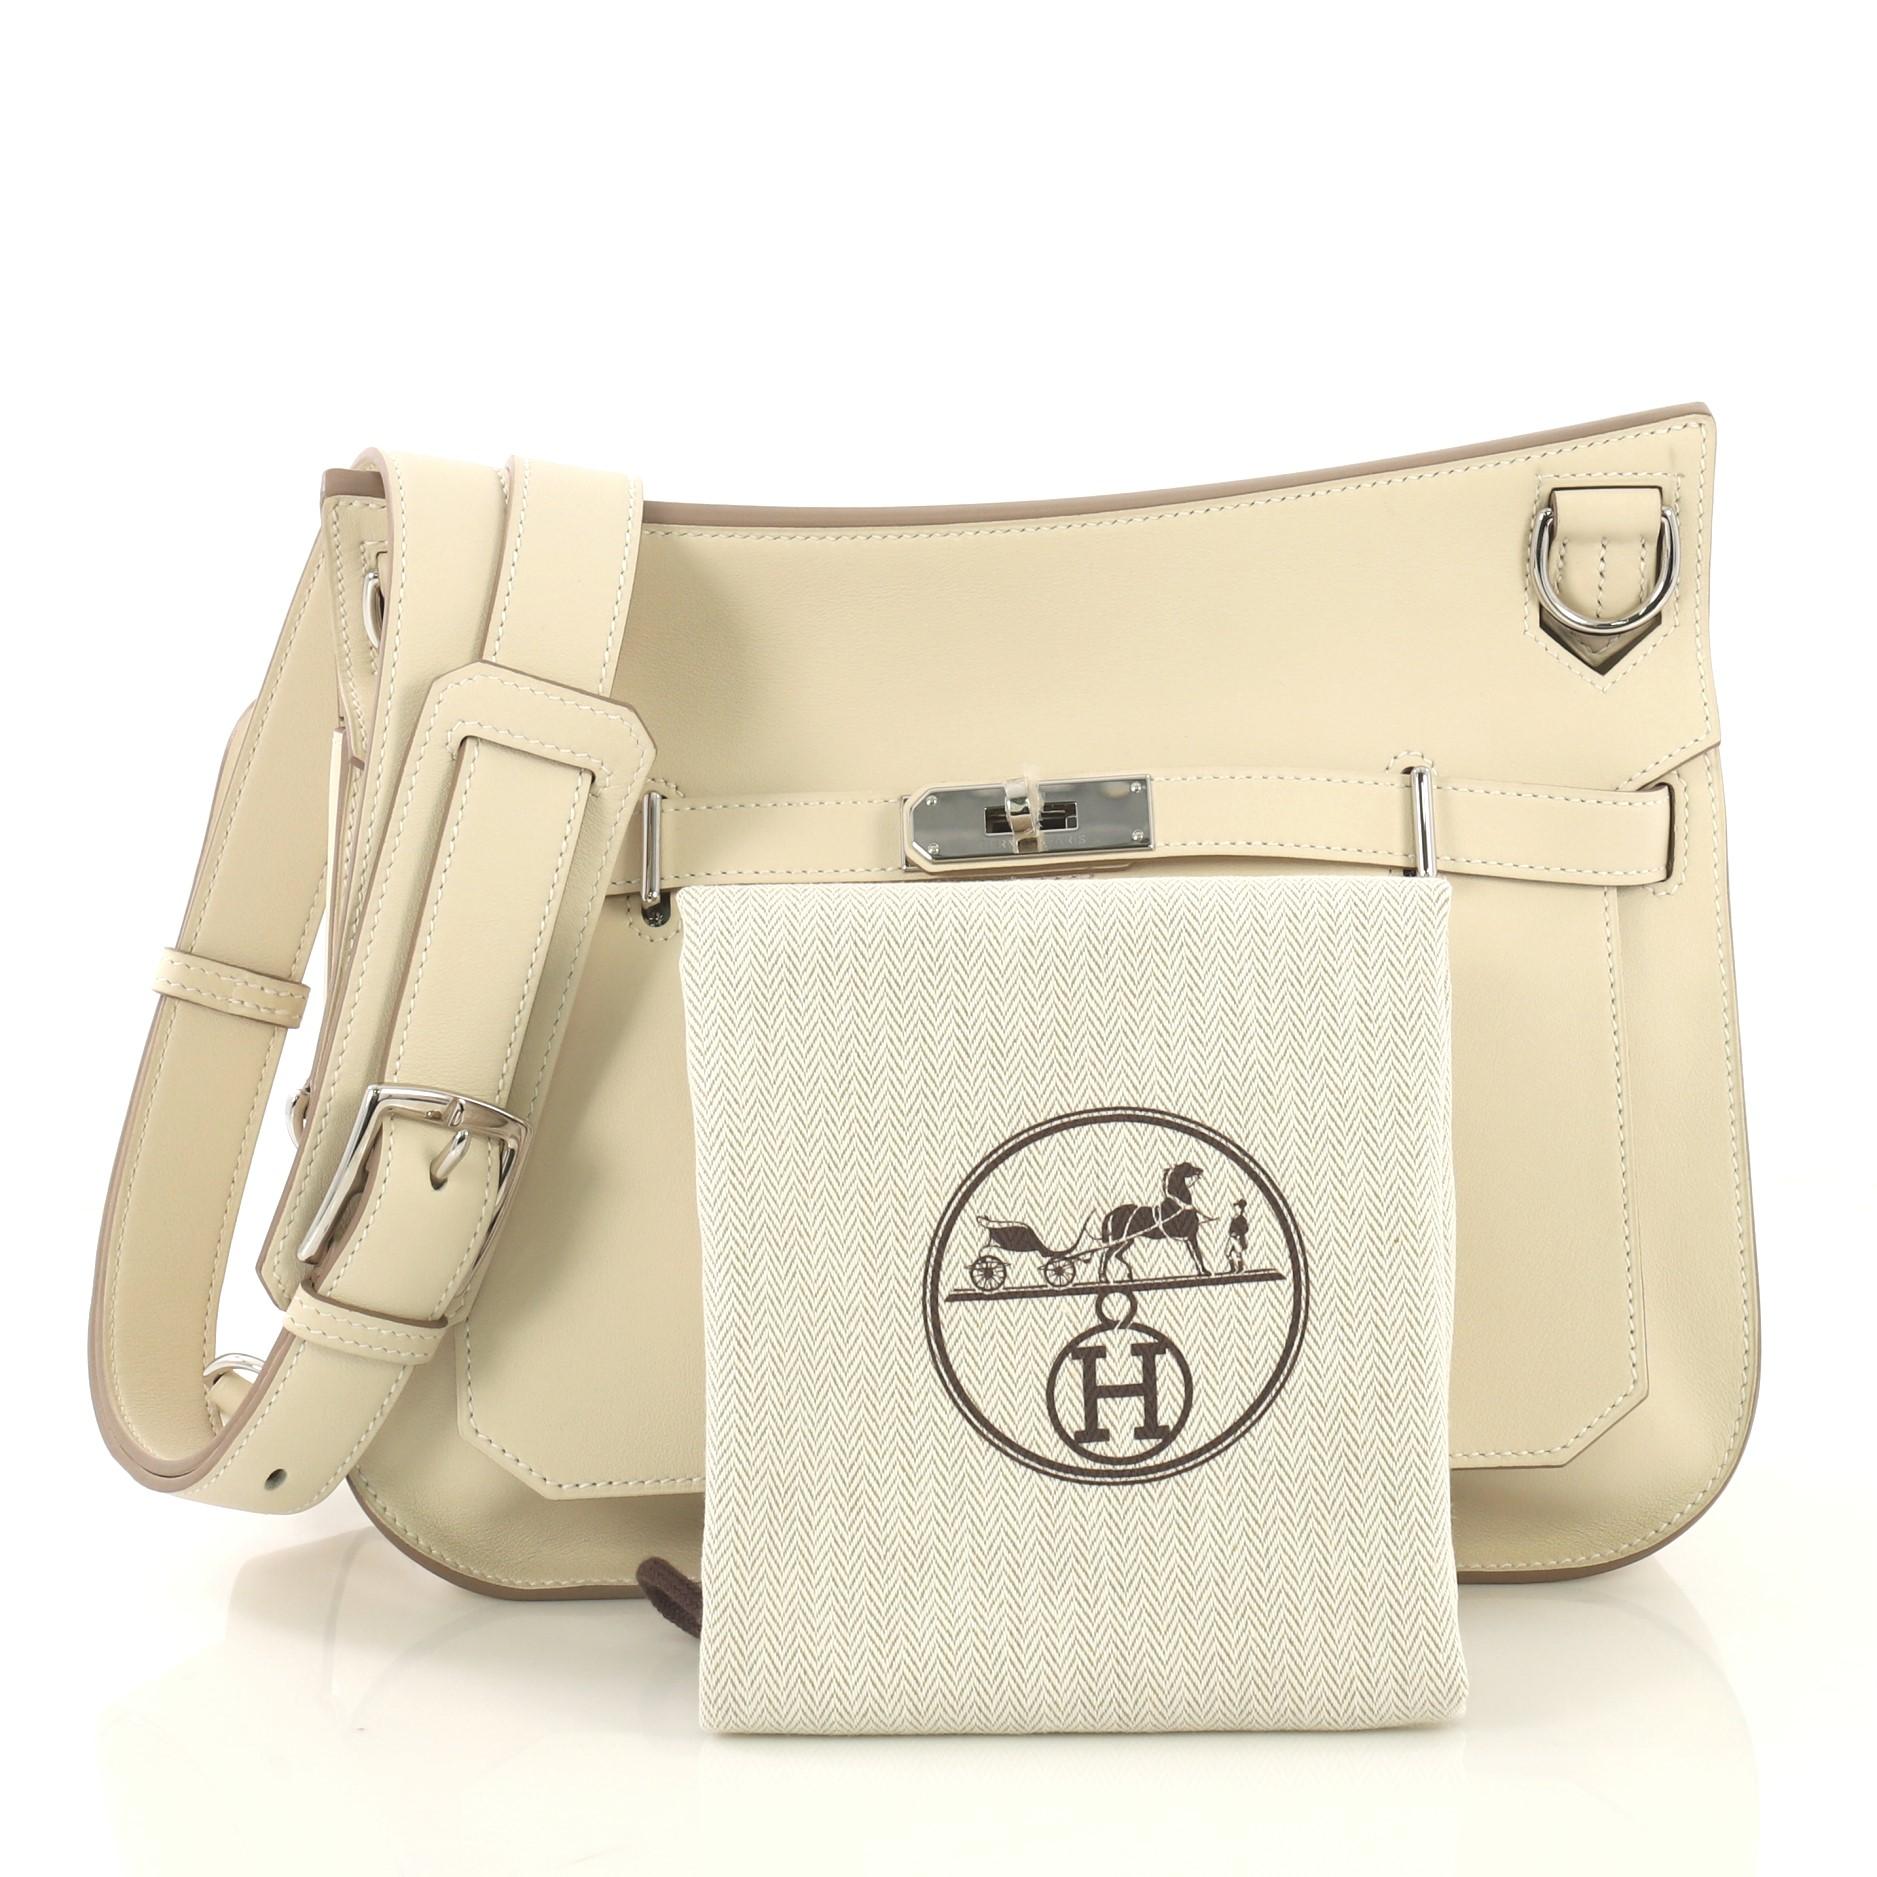 This Hermes Jypsiere Handbag Swift 28, crafted in Craie off white Swift leather, features a long adjustable strap and palladium hardware. Its turn-lock clasp closure opens to a Craie off white Swift leather interior with slip and zip pockets. Date